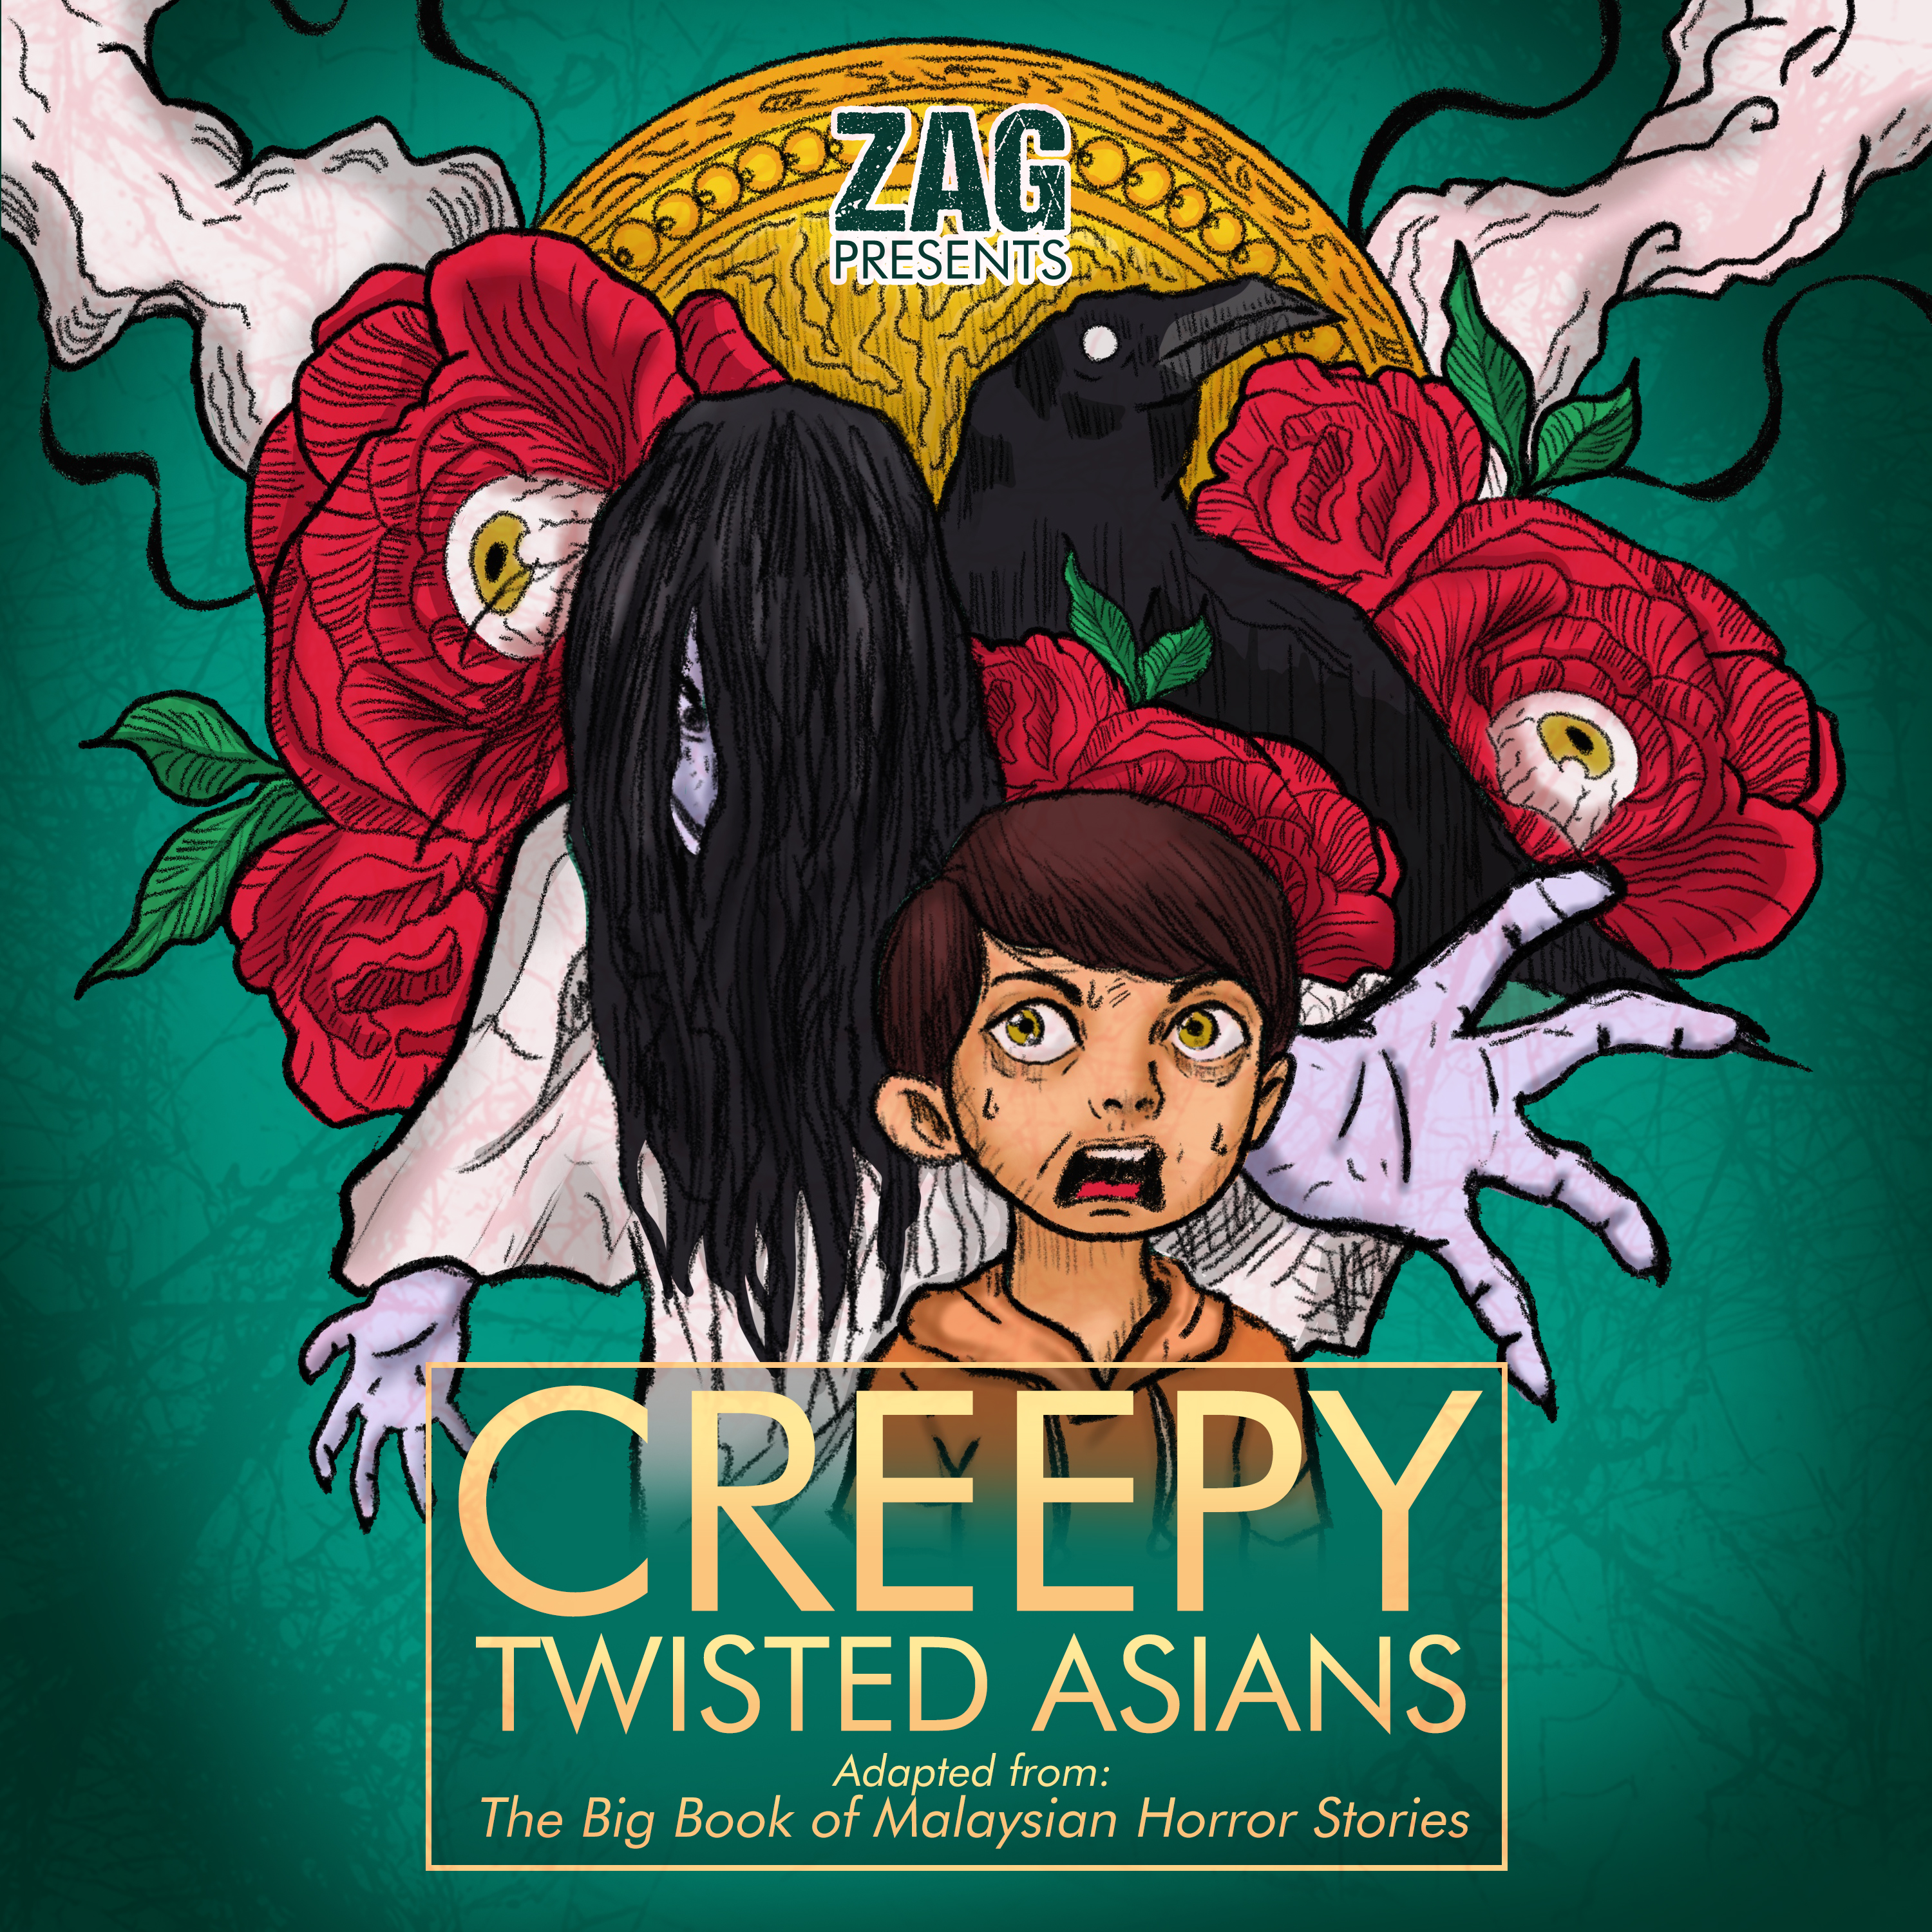 Creepy Twisted Asians (Trailer)